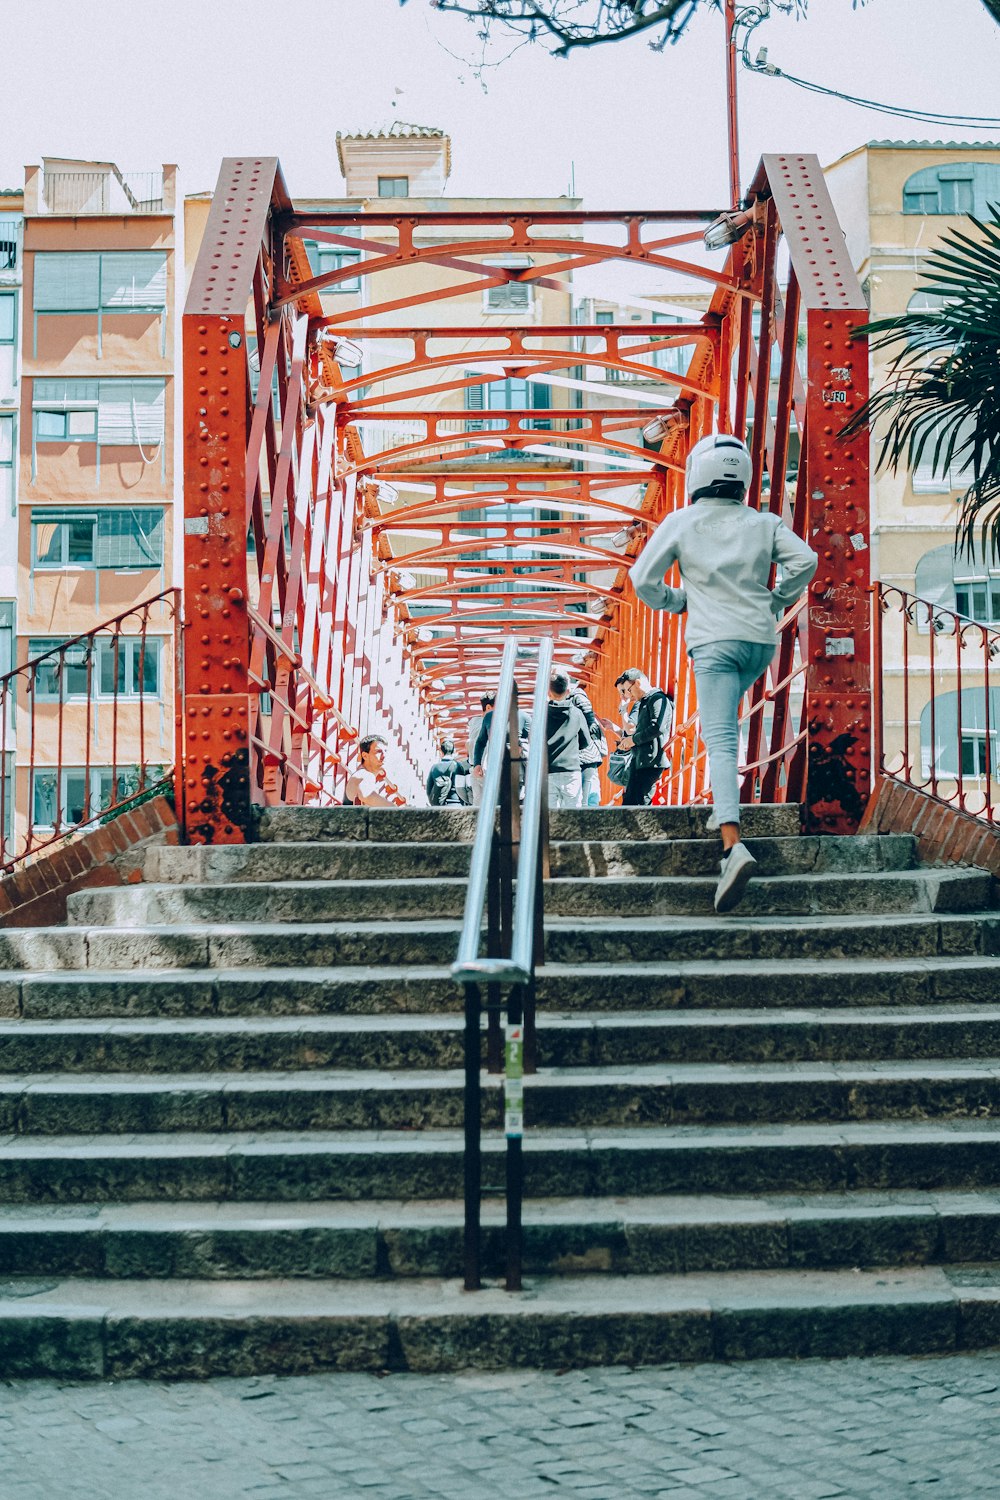 a skateboarder is going down a set of stairs